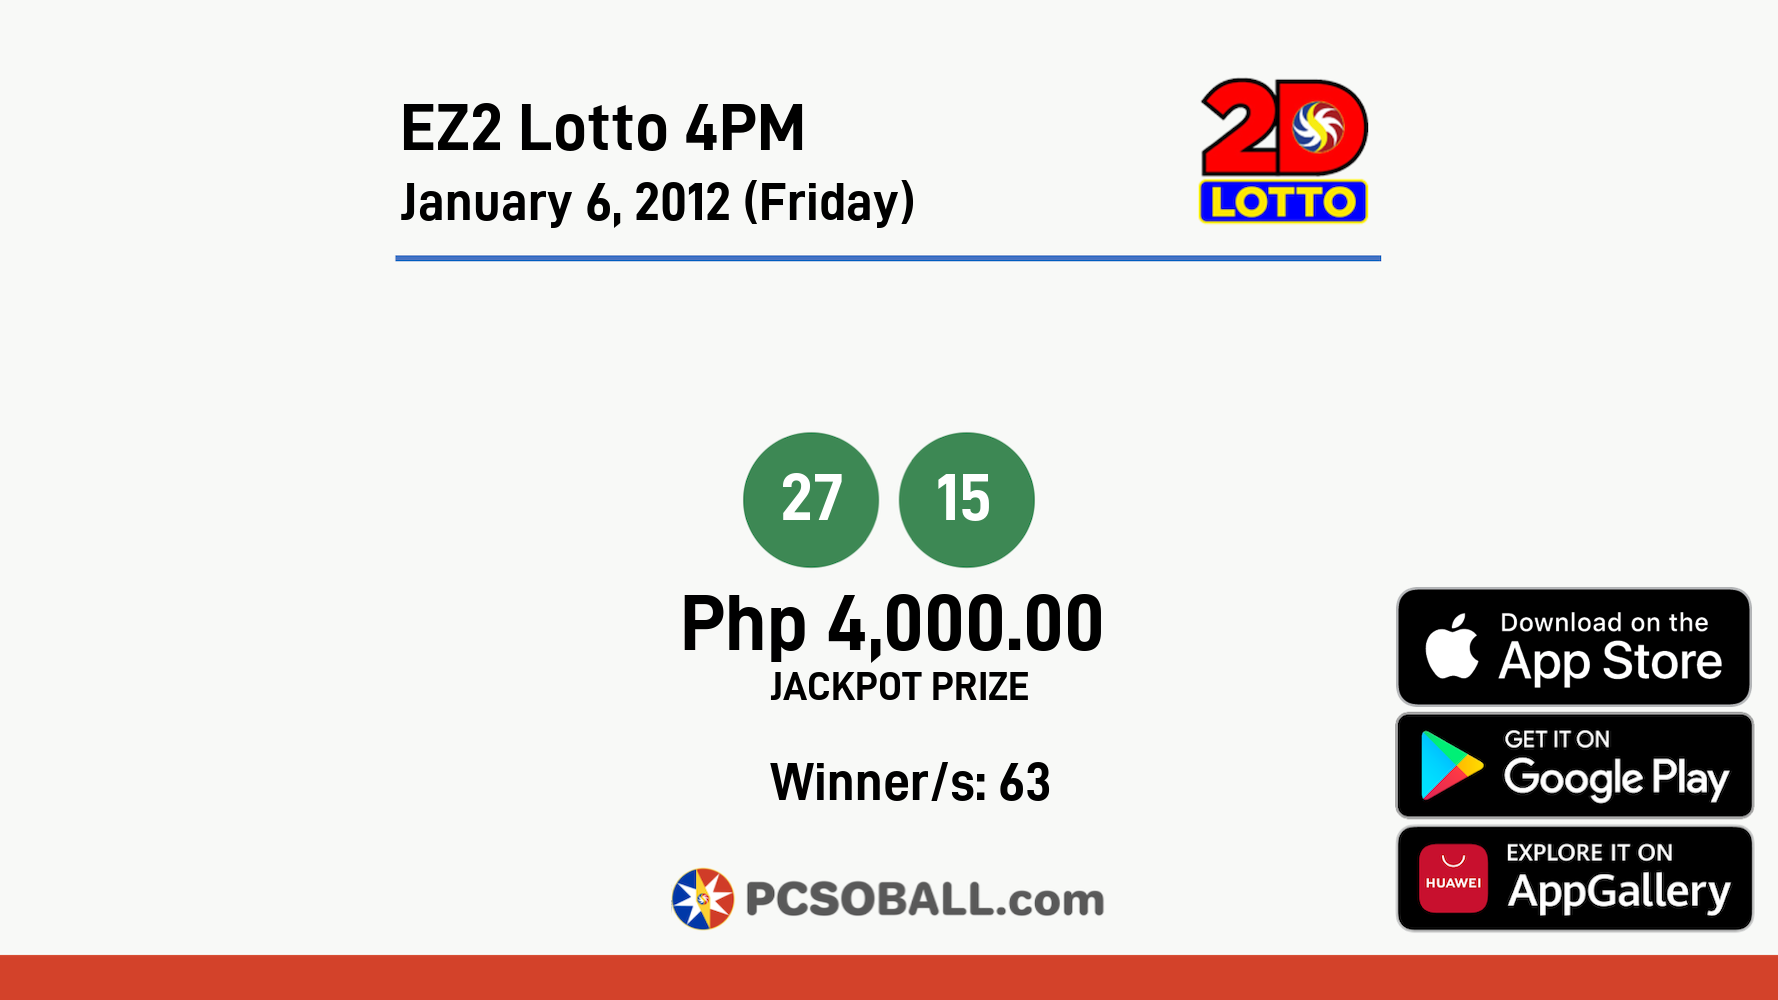 EZ2 Lotto 4PM January 6, 2012 (Friday) Result